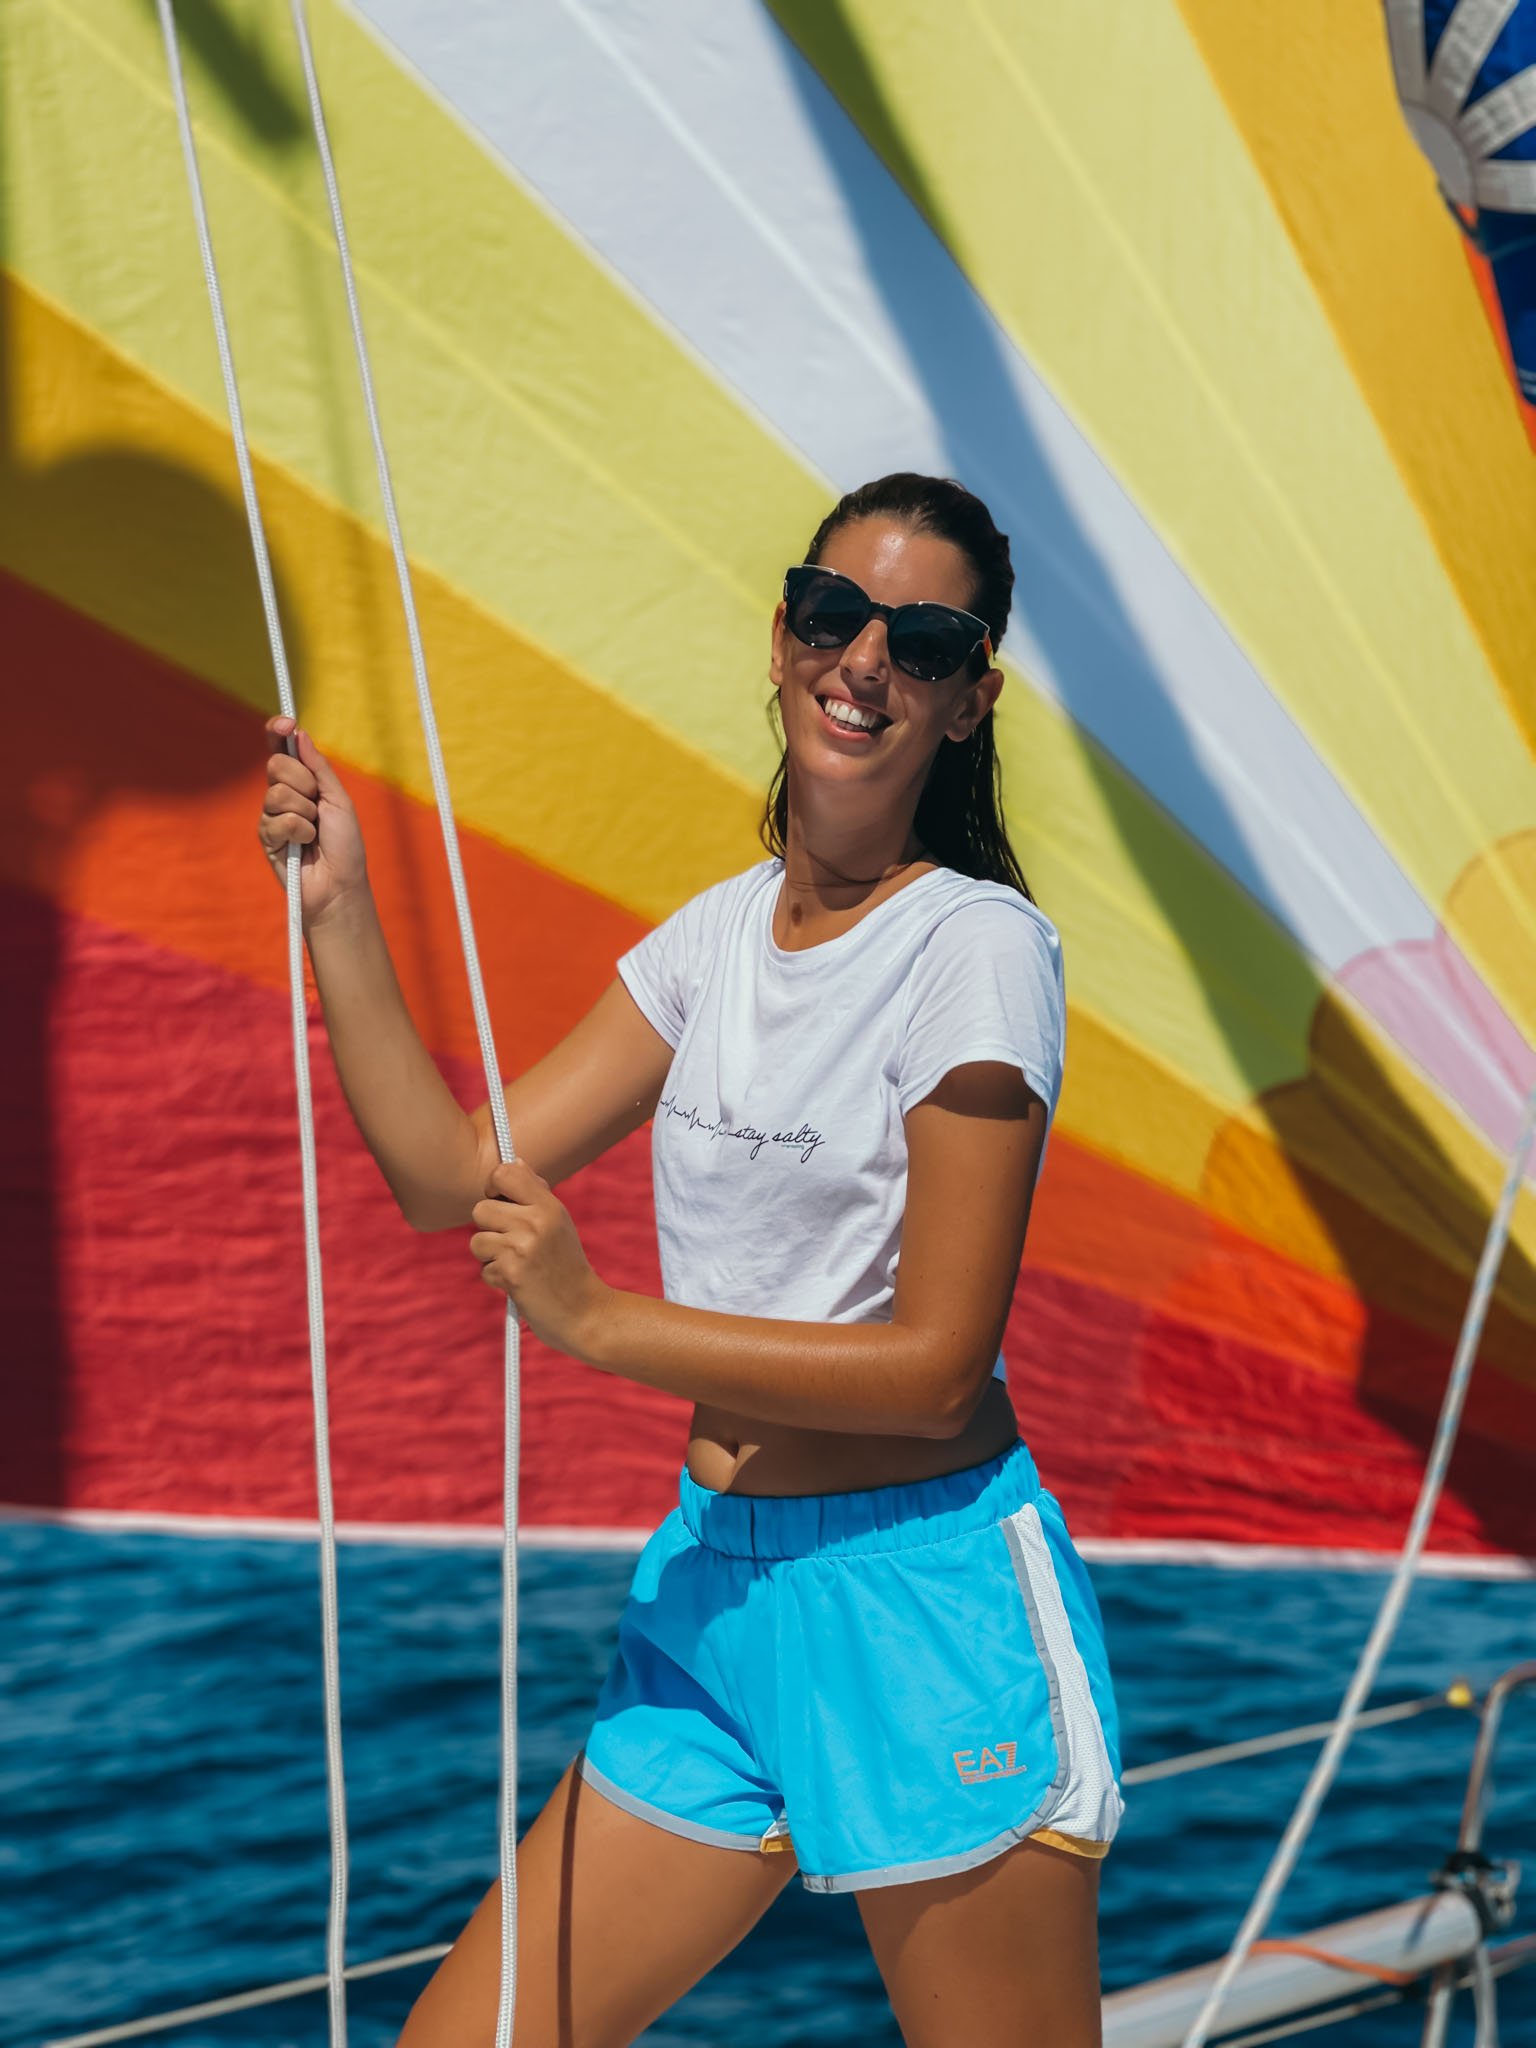 sailing outfit_4496.jpg